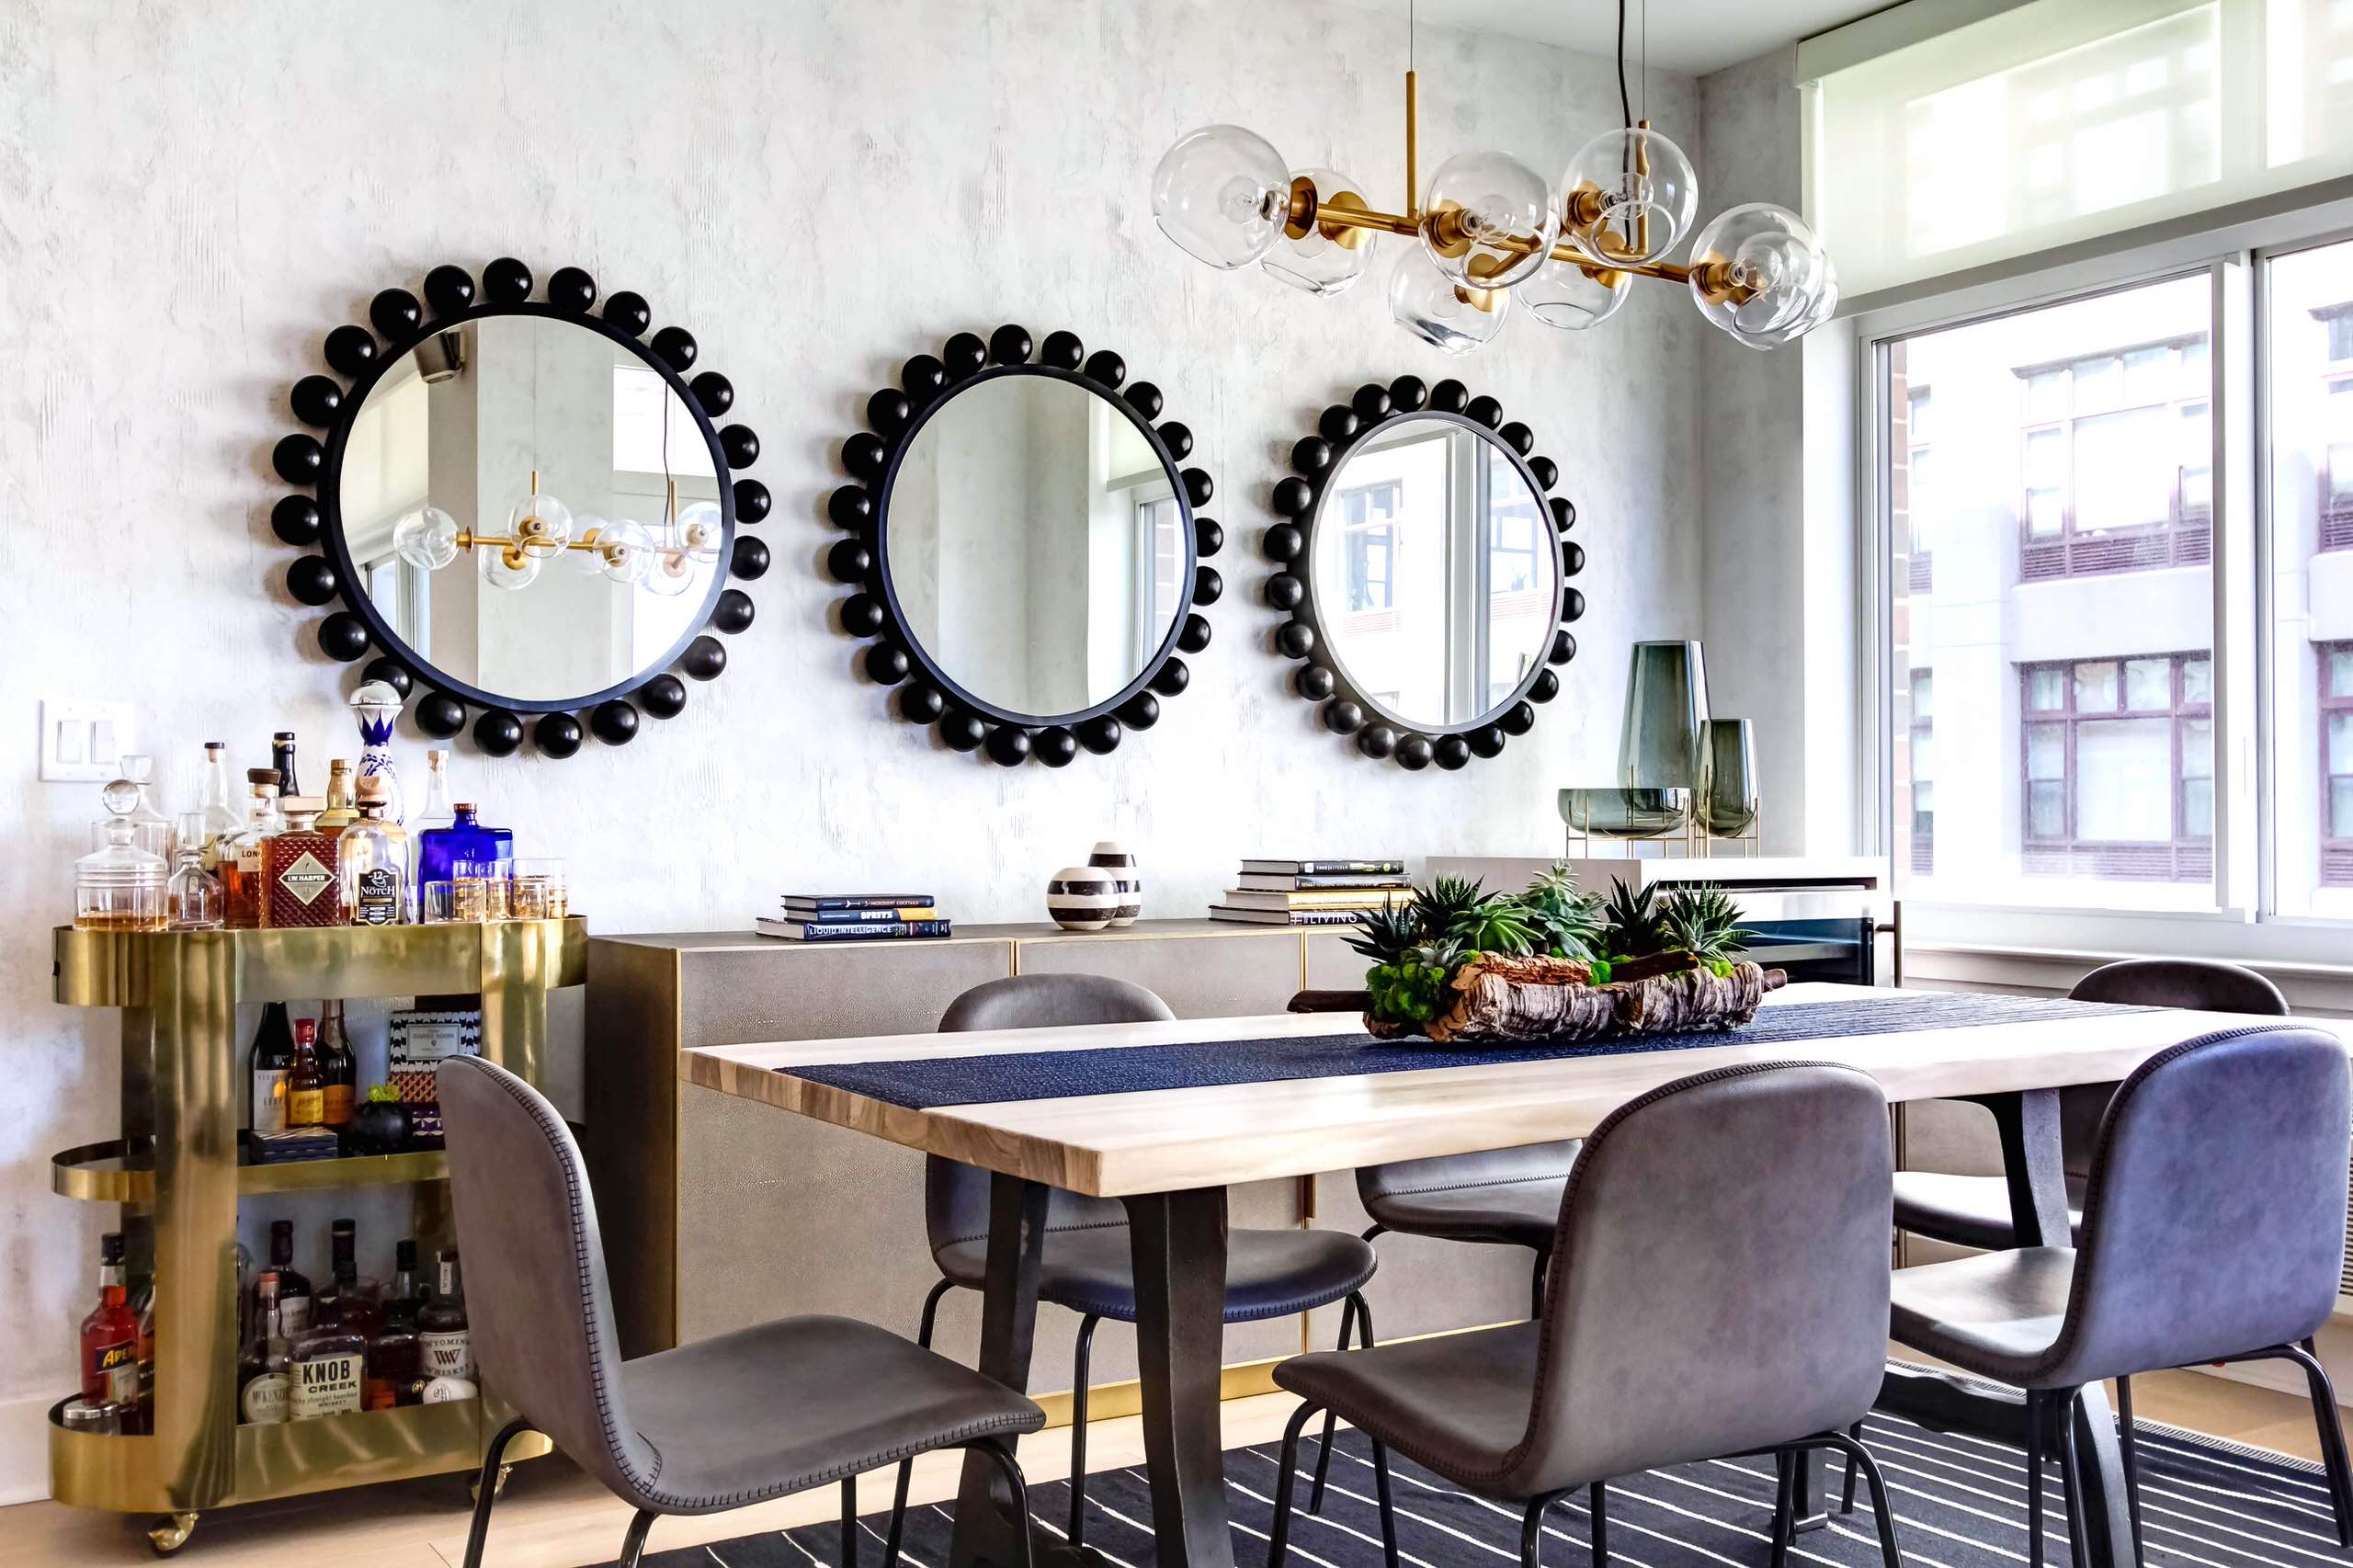 Mirrors for dining room (from Houzz)